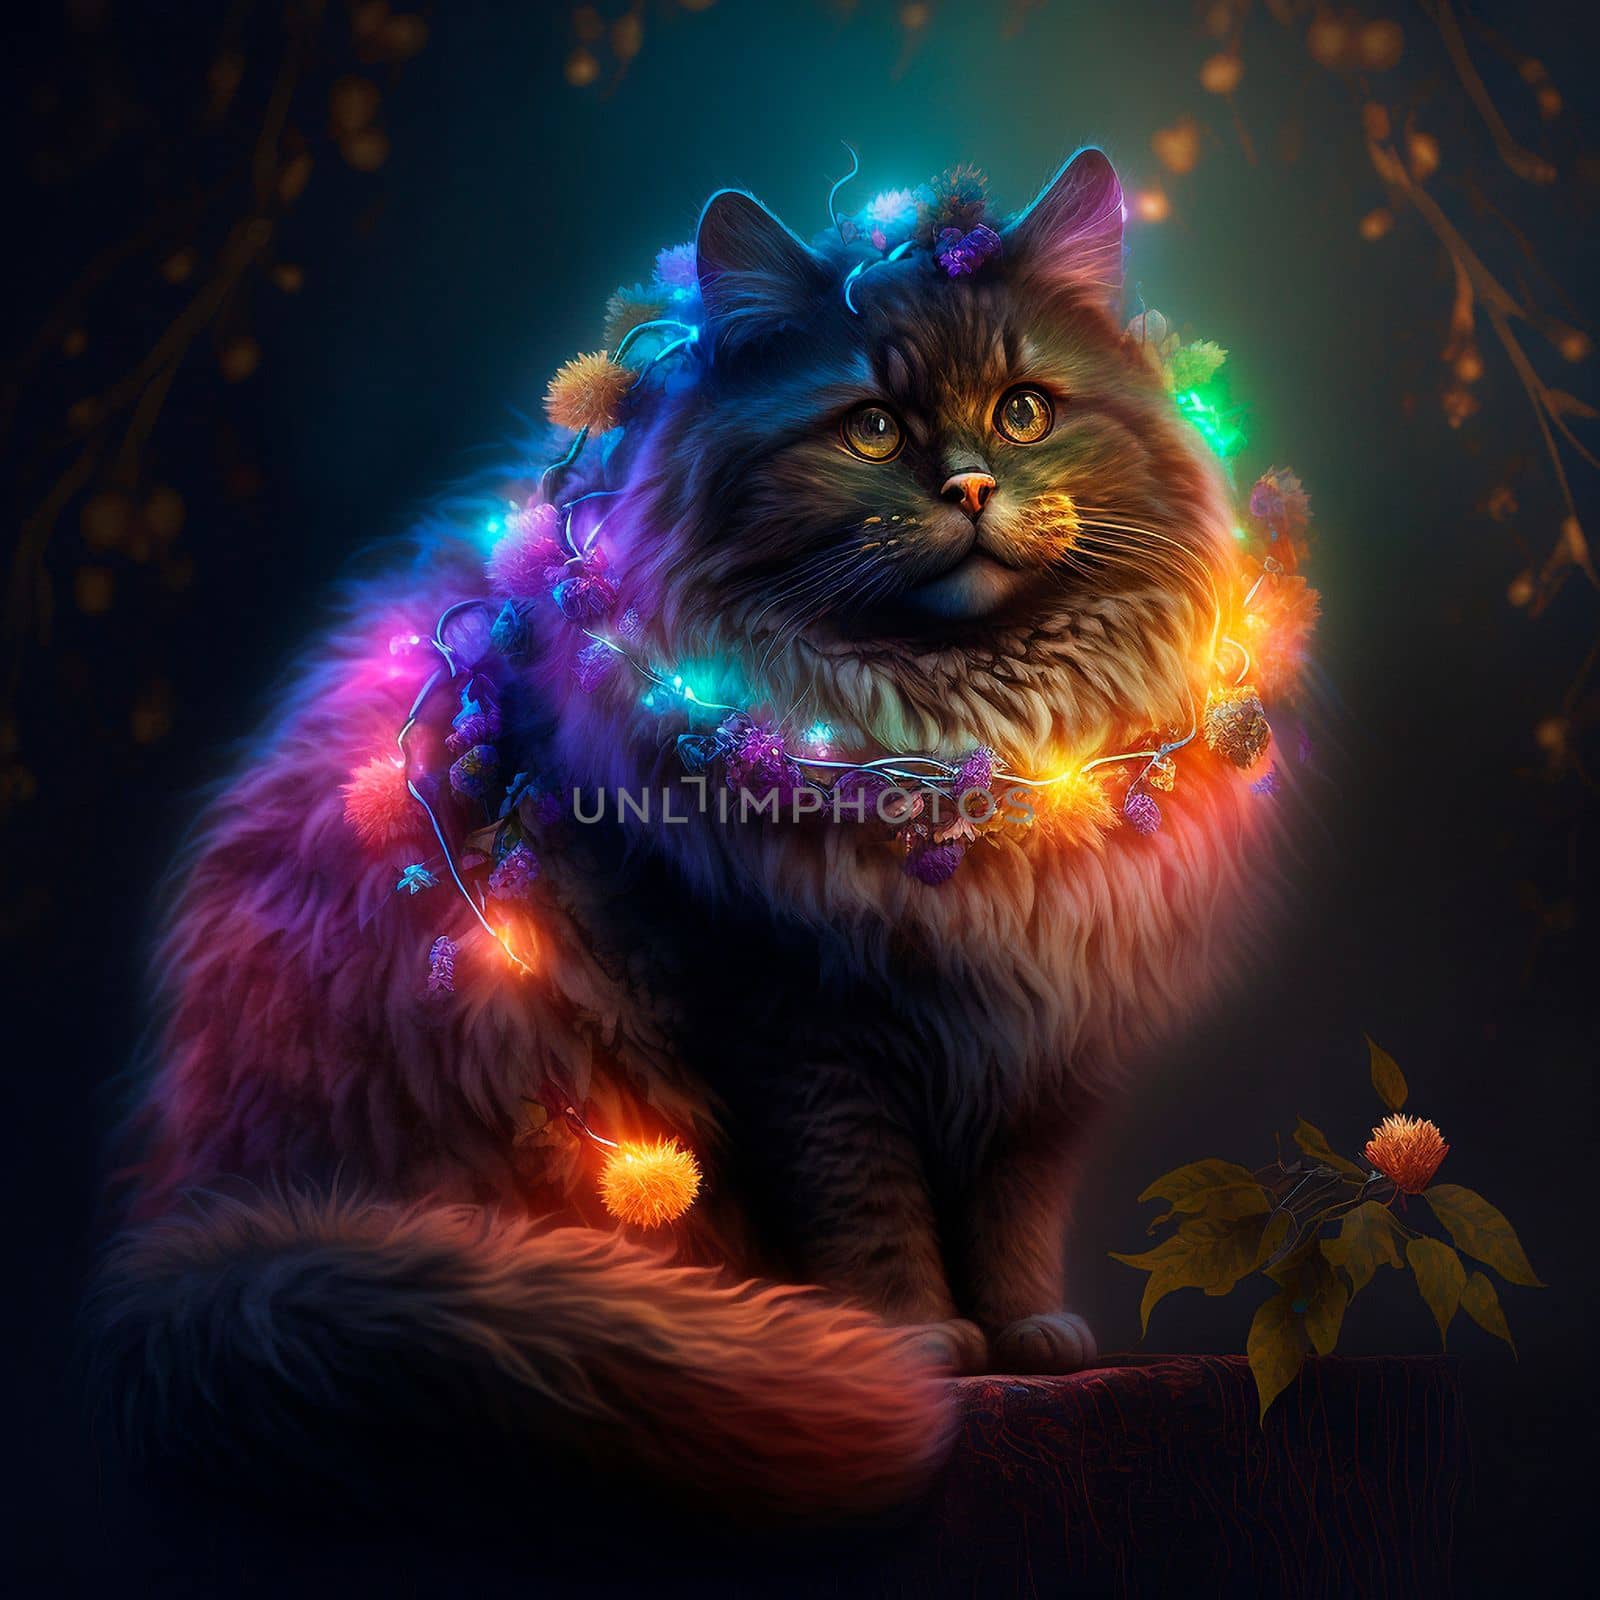 Cat with a garland by NeuroSky